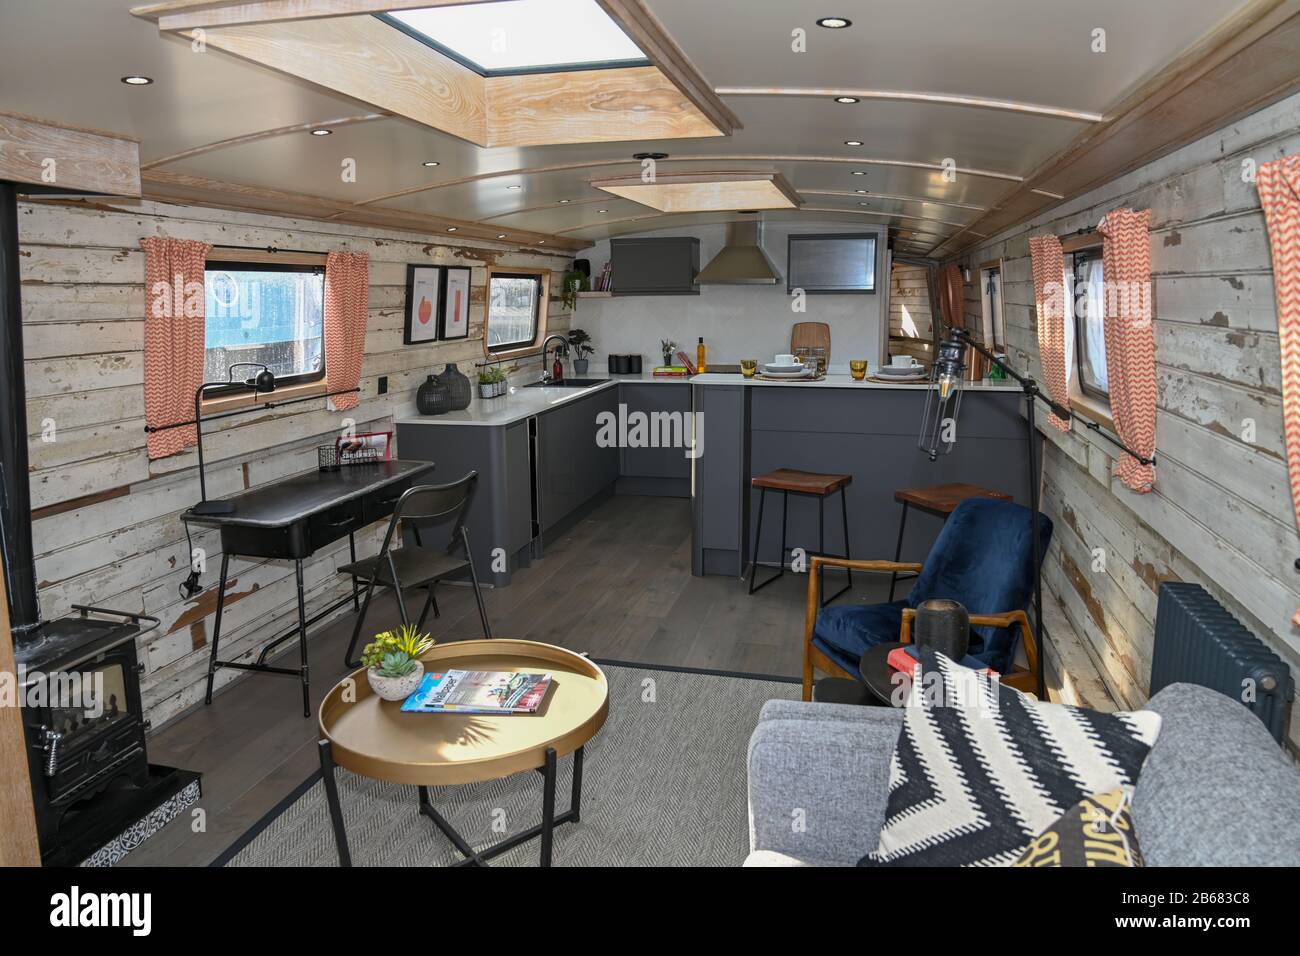 Landscape view of the unusual and stylish interior of a new live aboard boat for the inland waterways of the UK using recycled materials. Stock Photo